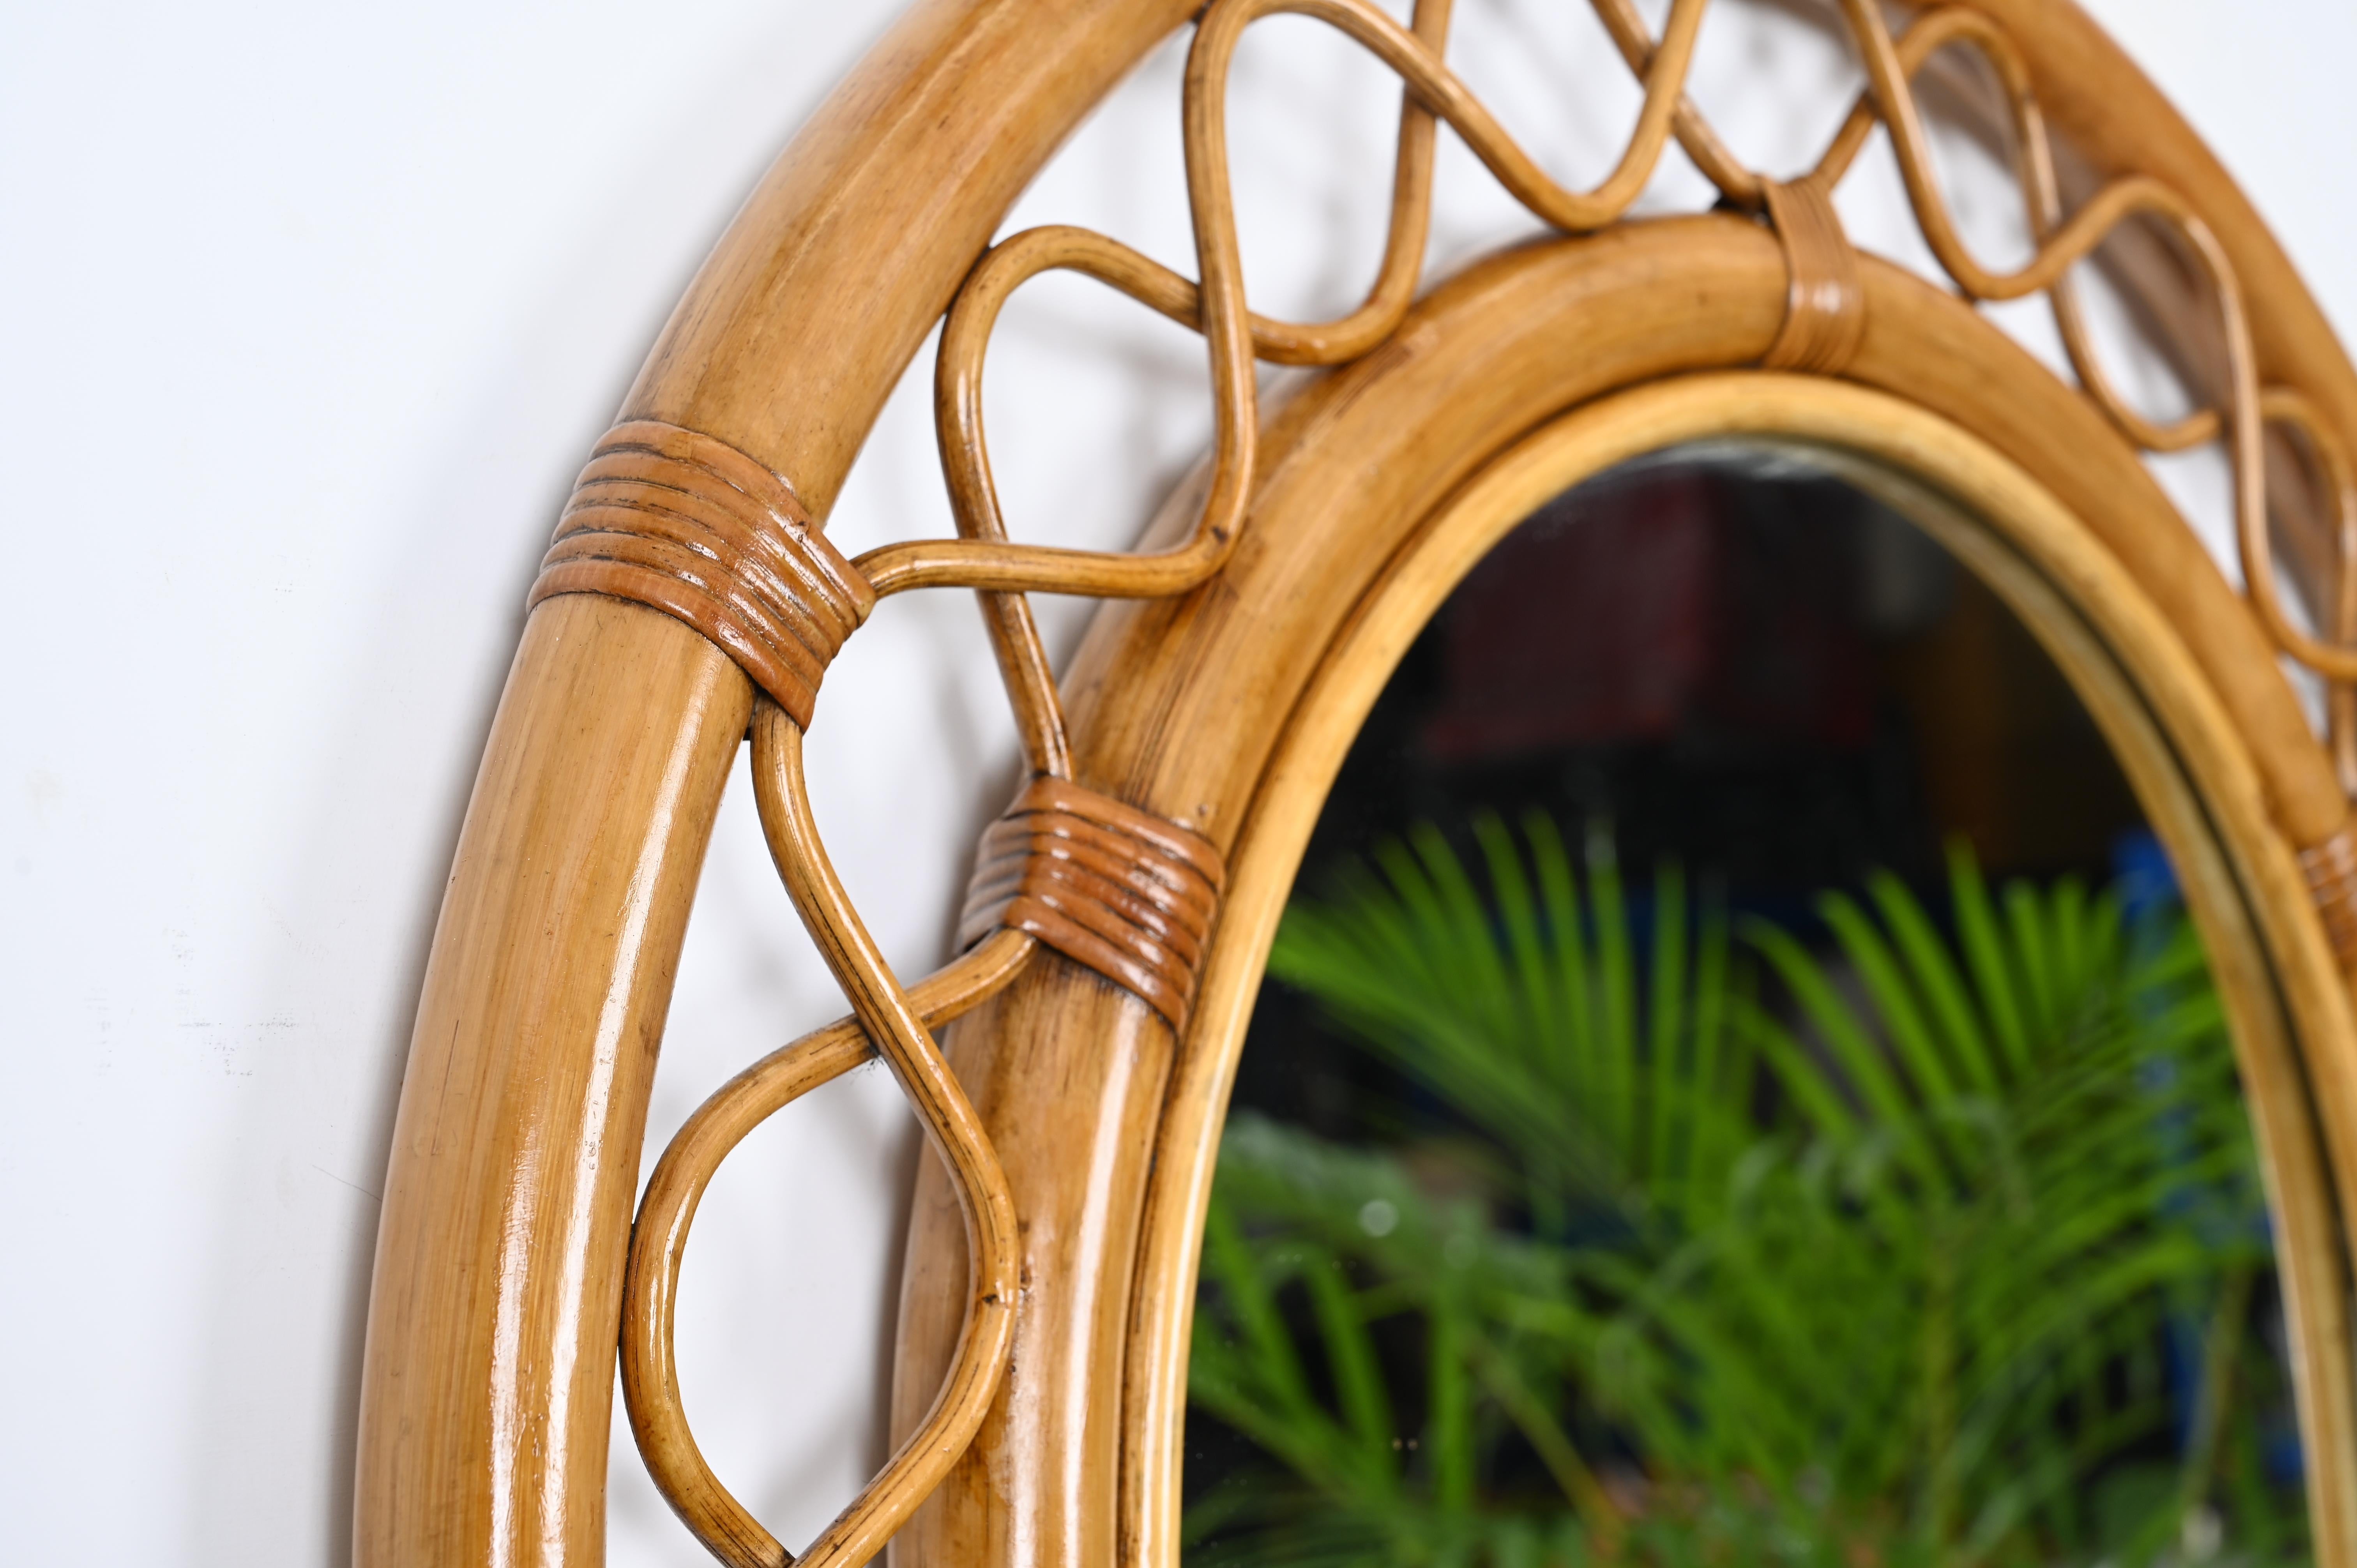 Hand-Crafted French Riviera Arch Mirror in Rattan, Wicker and Bamboo, Italy 1960s For Sale